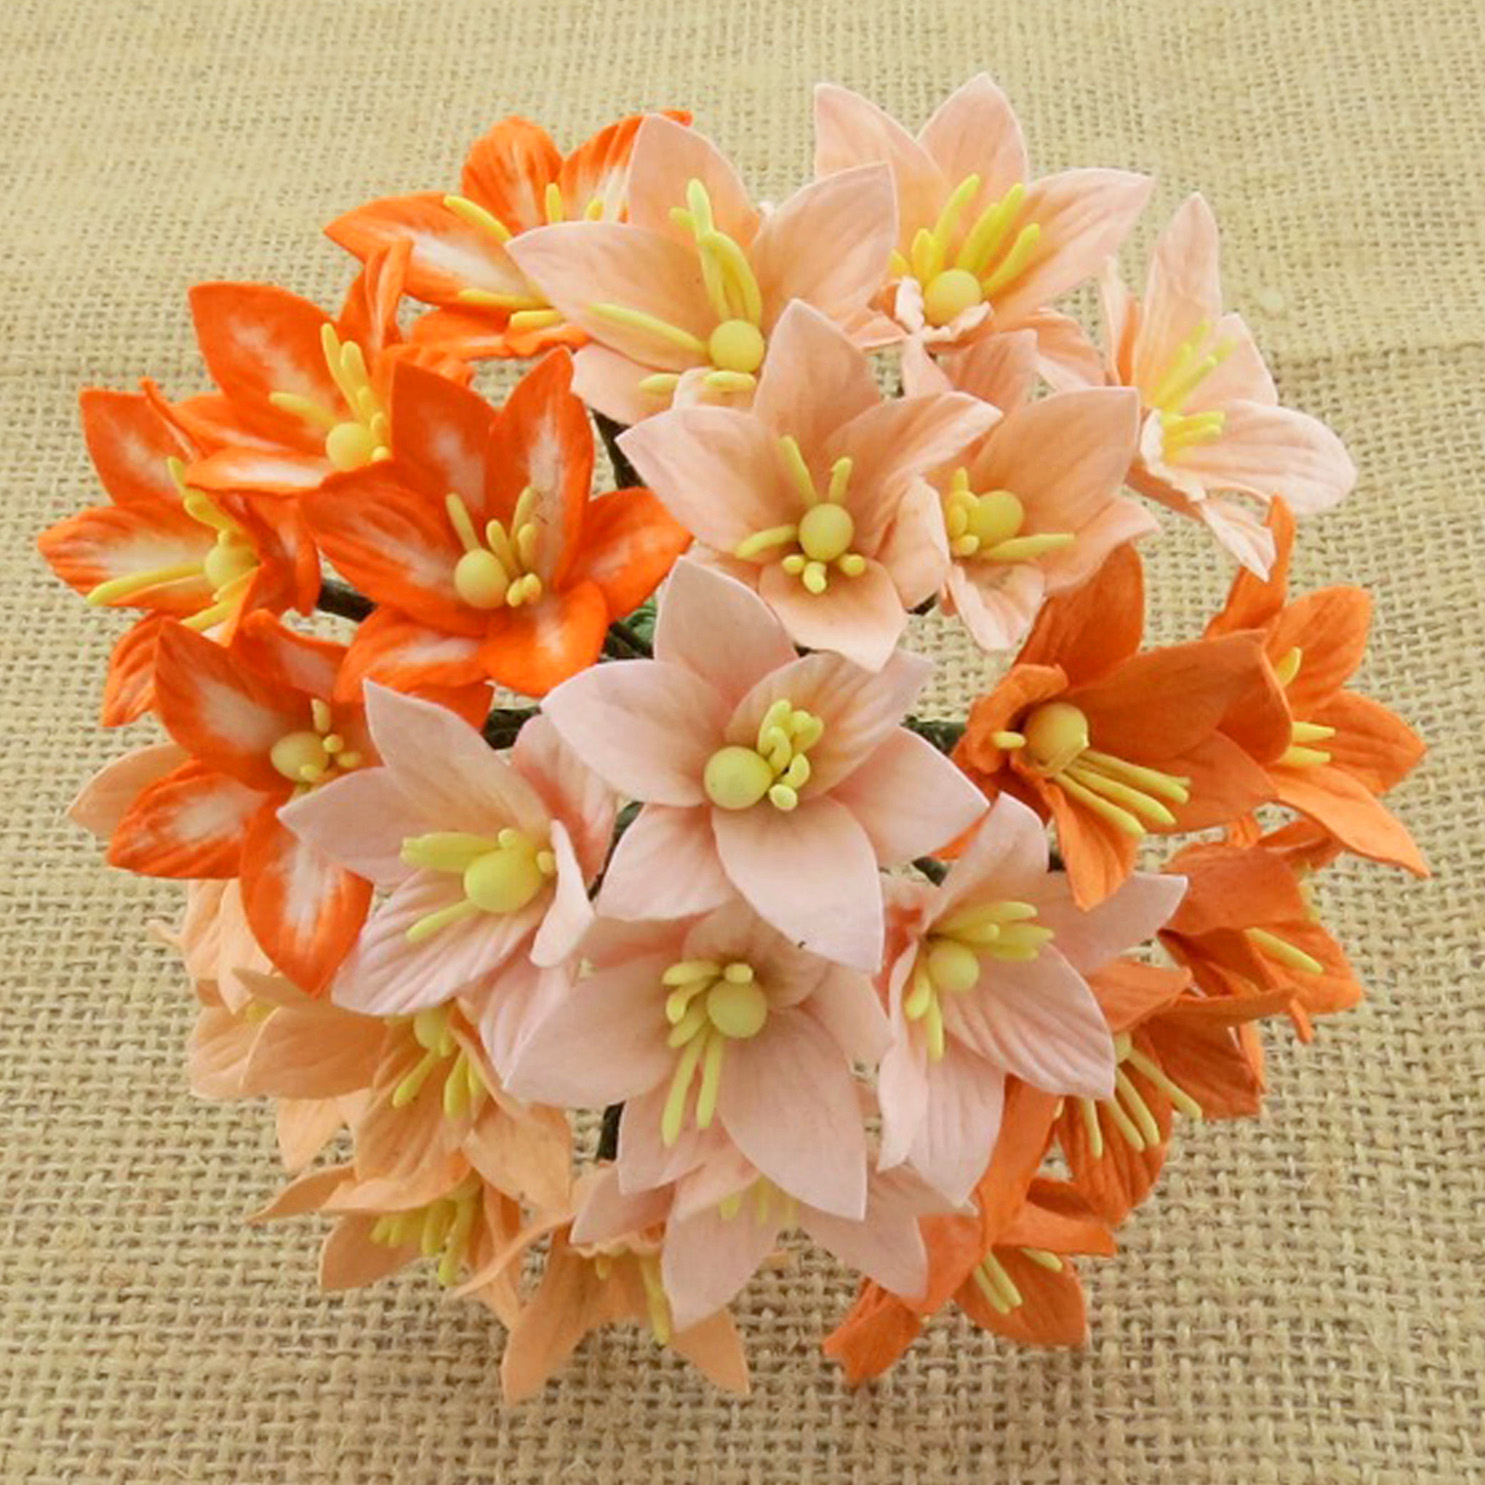 50 MIXED PEACH/ORANGE MULBERRY PAPER LILY FLOWERS - 5 COLOR